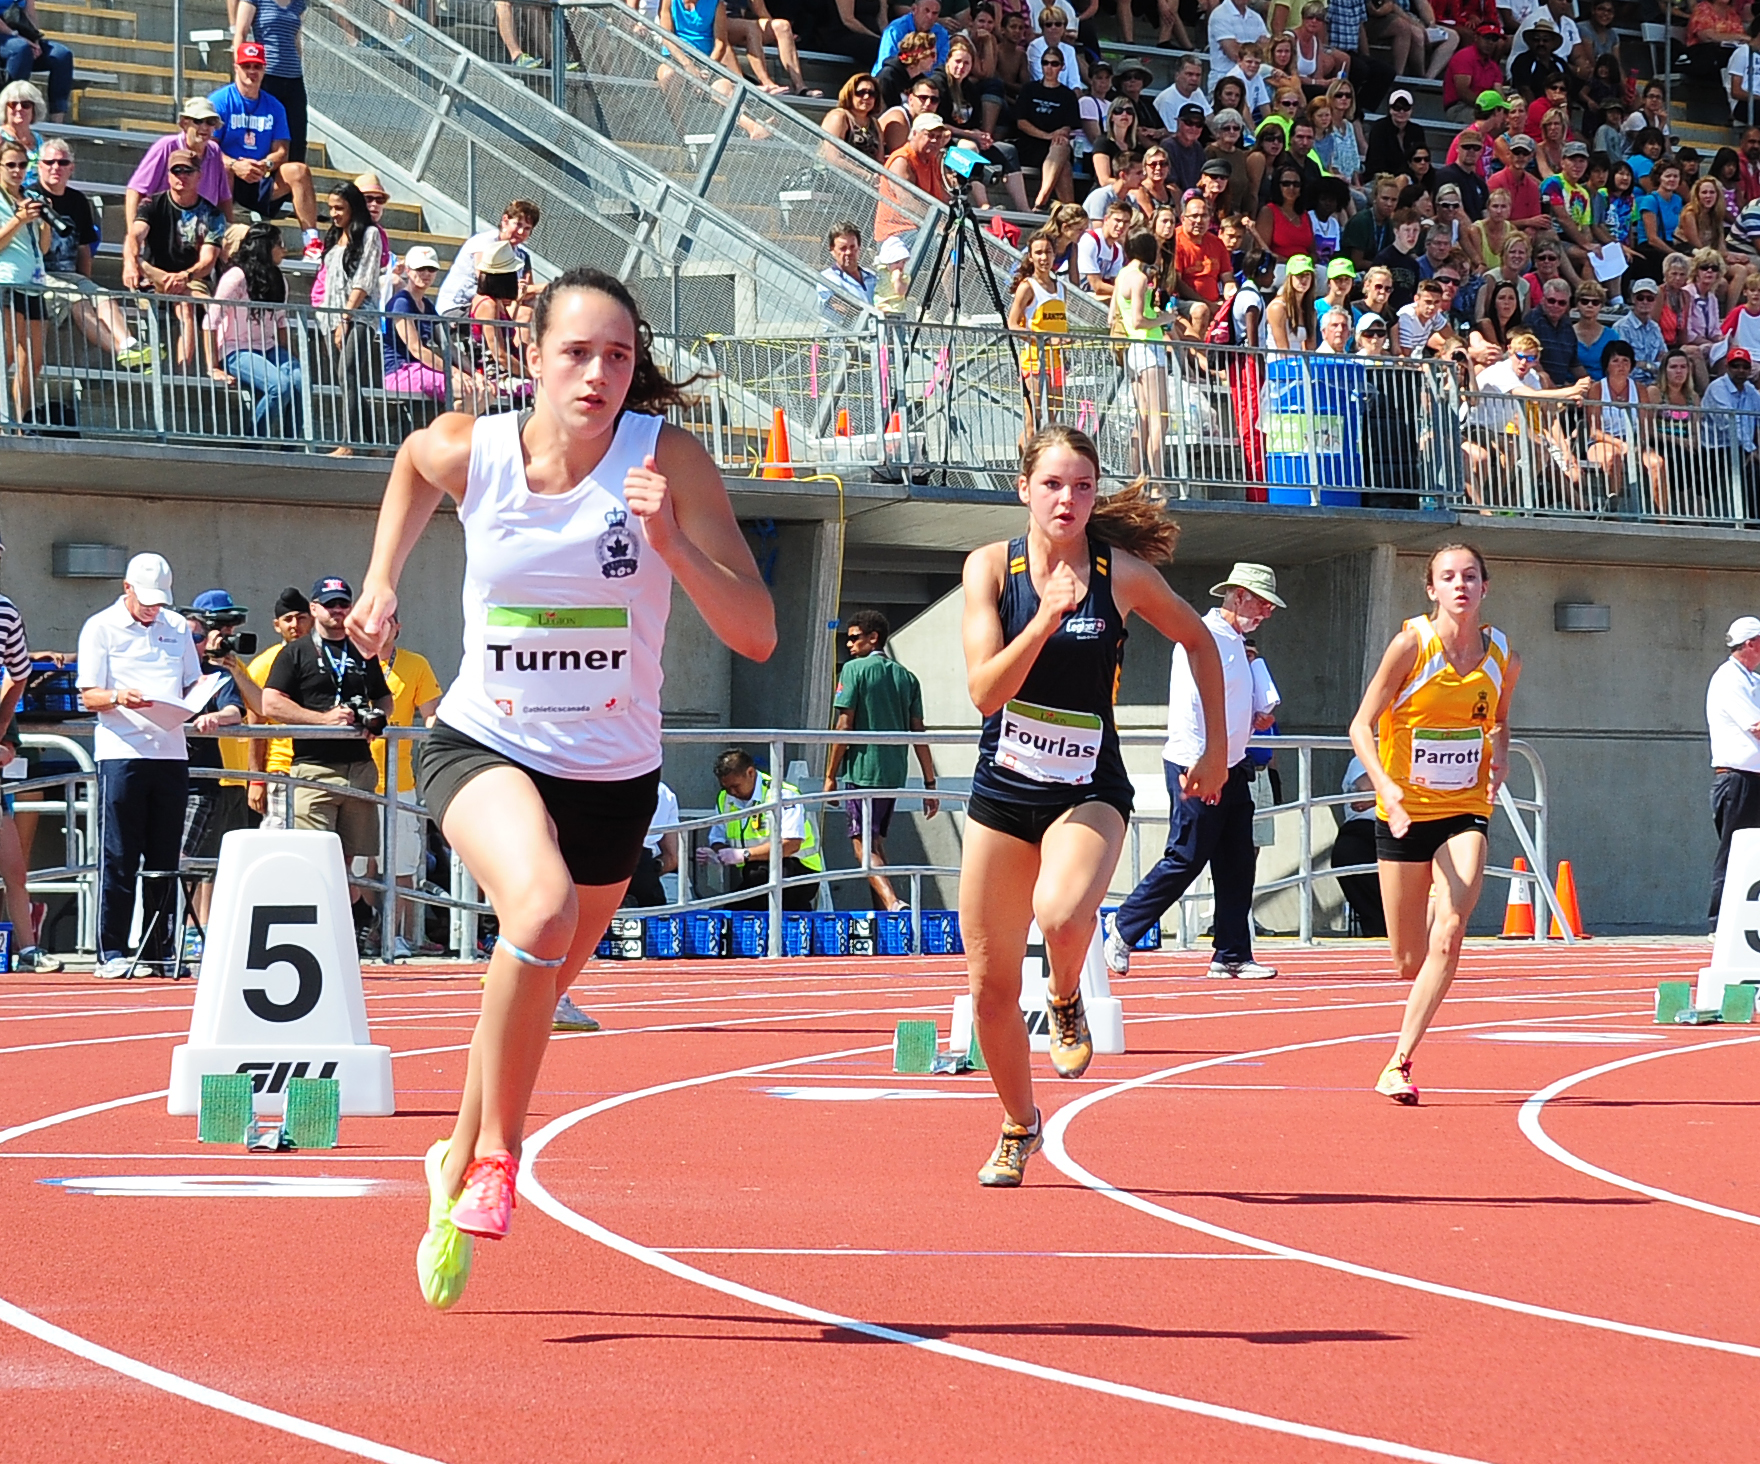 runners compete at an outdoor track with large audience in the stands